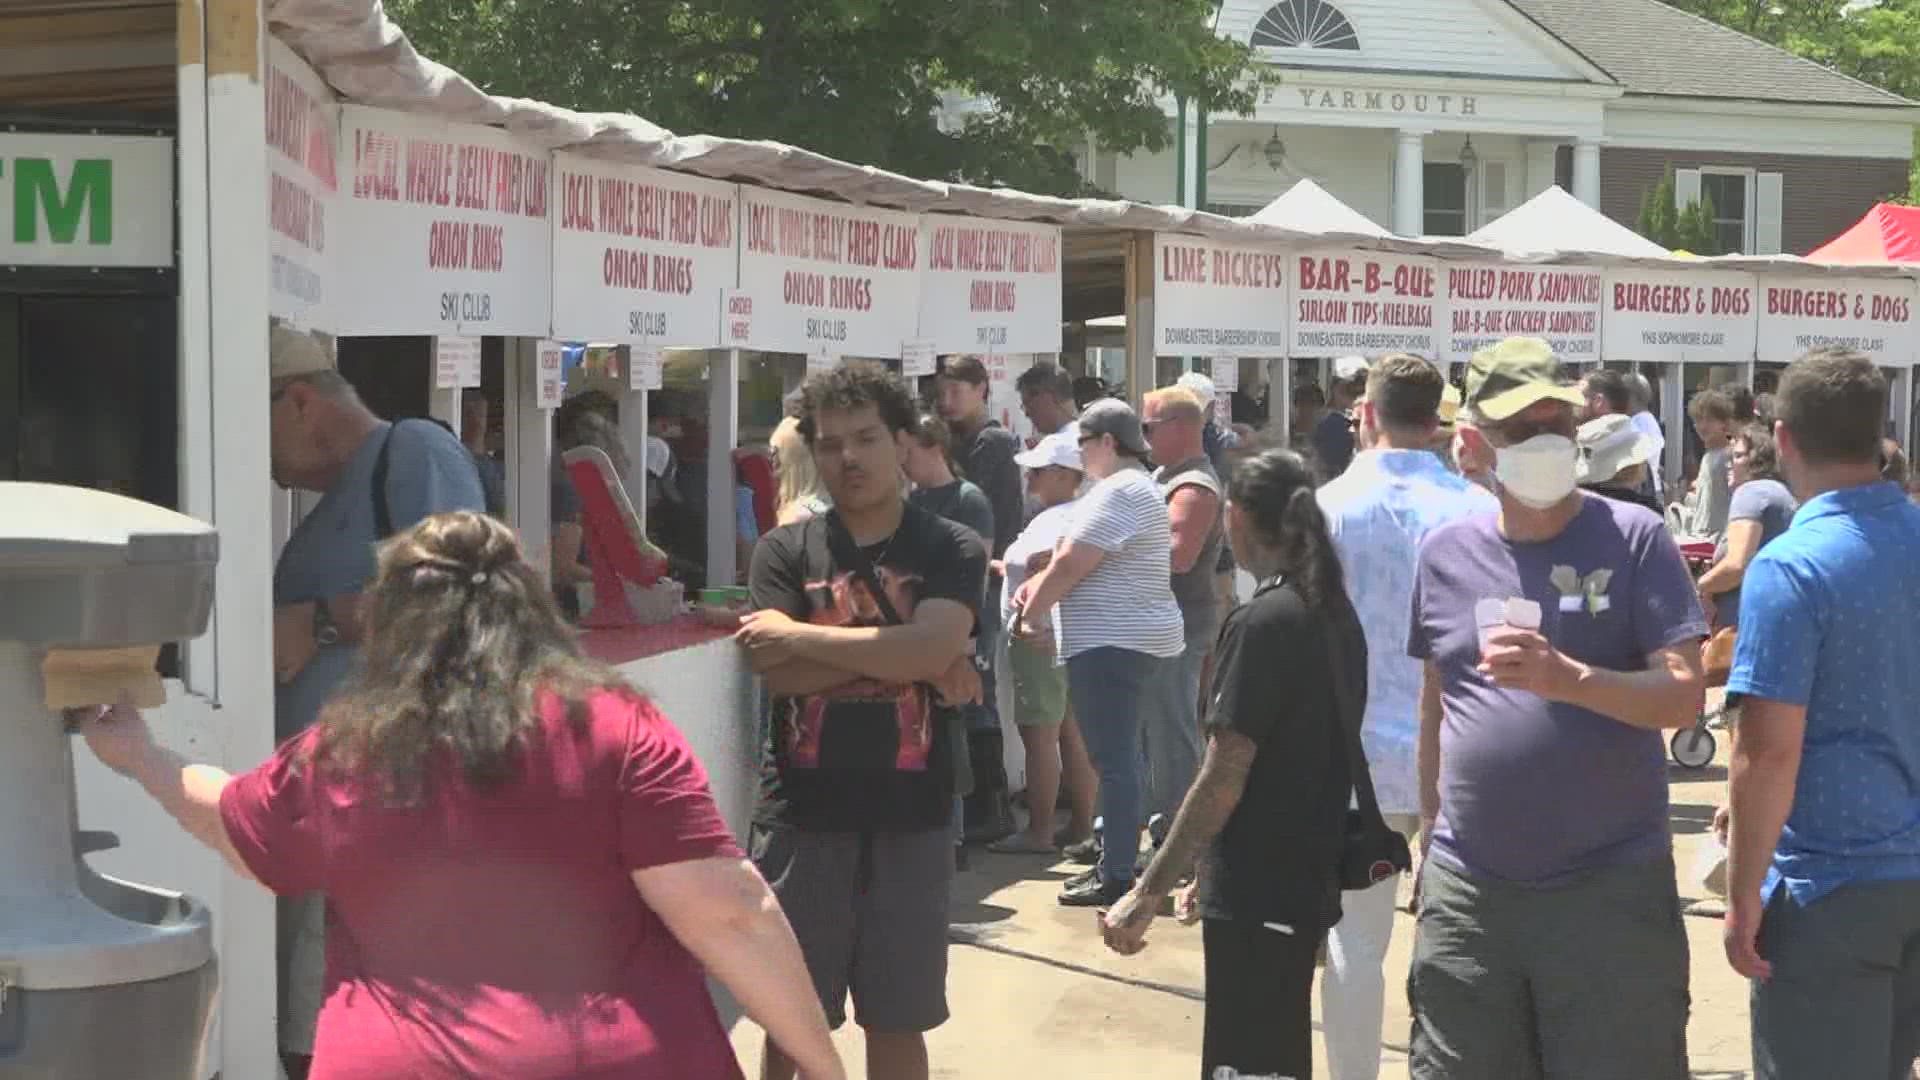 The Yarmouth Clam Festival returned from a pandemic hiatus, bringing shucking contests, fried foods, and fun for families longing for the historic festival.